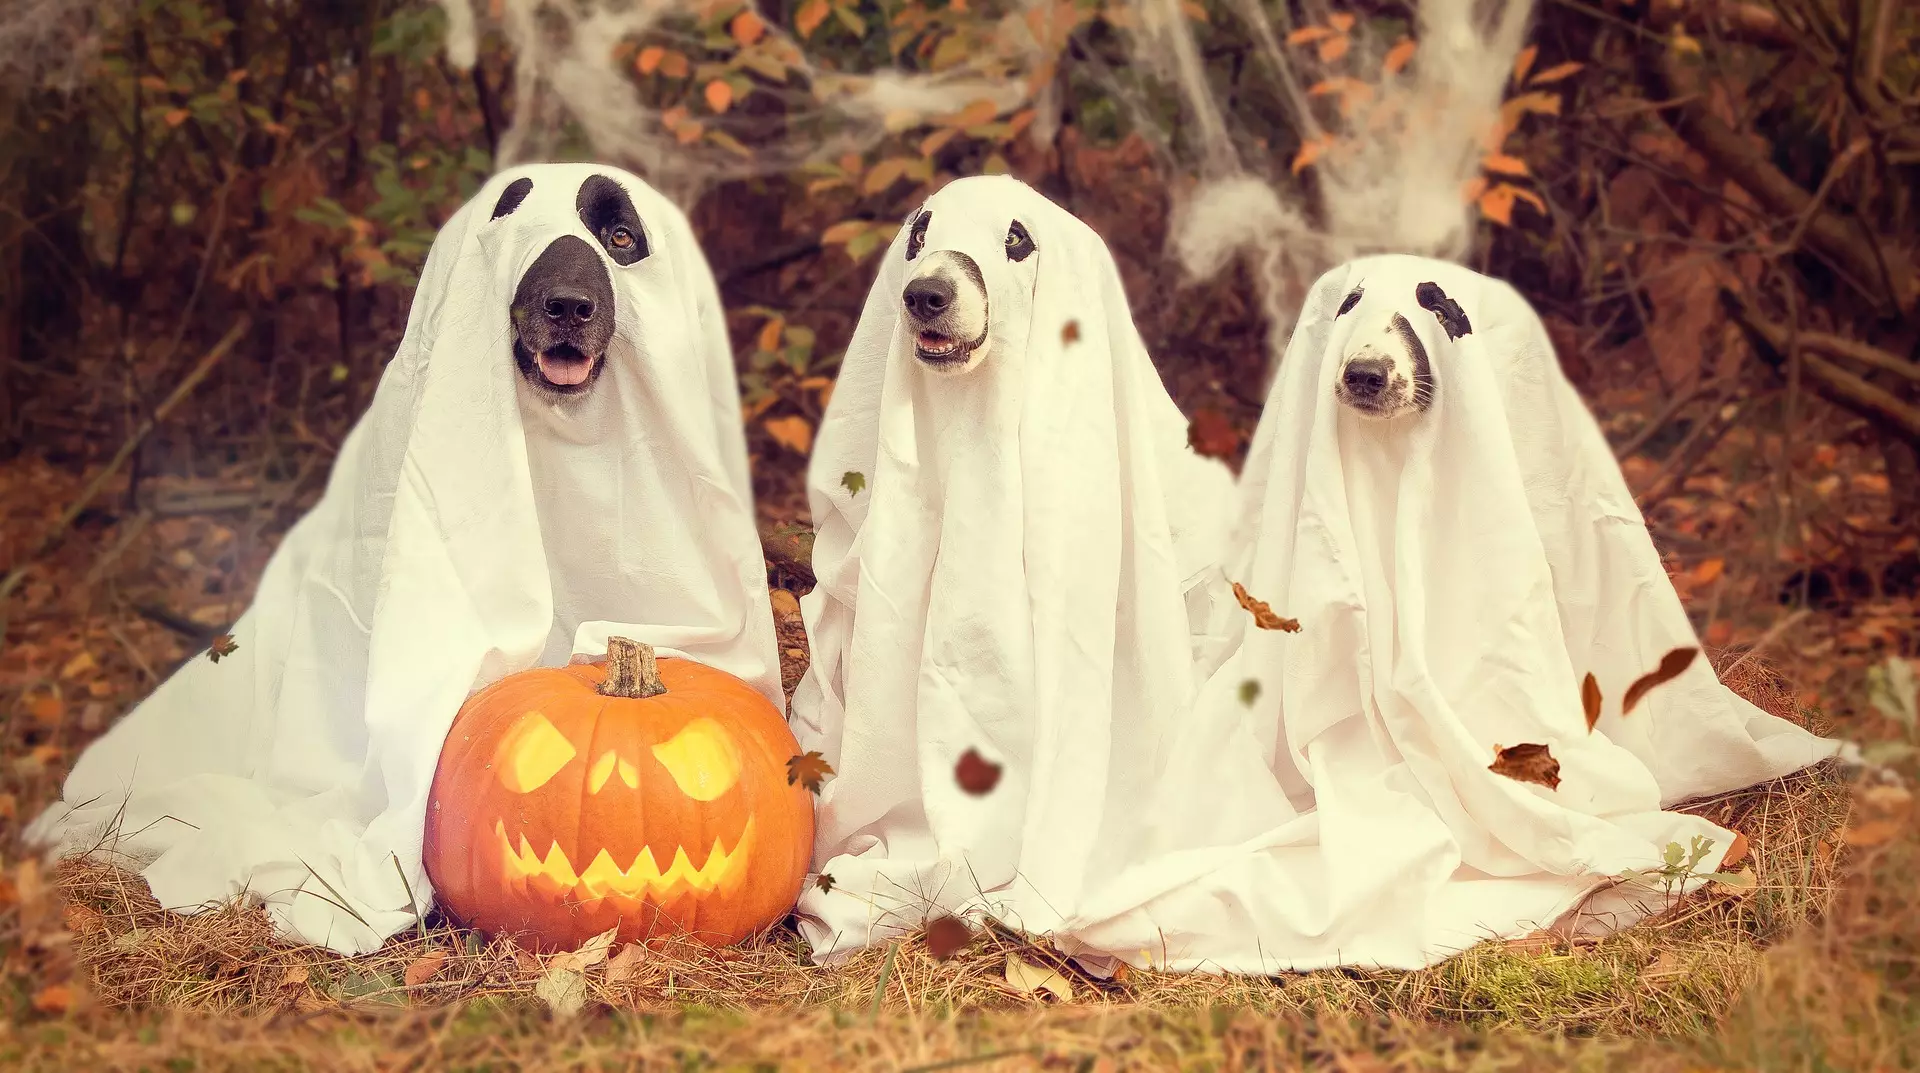 We doubt the ghost dog at Airth Castle is as cute as these guys. (